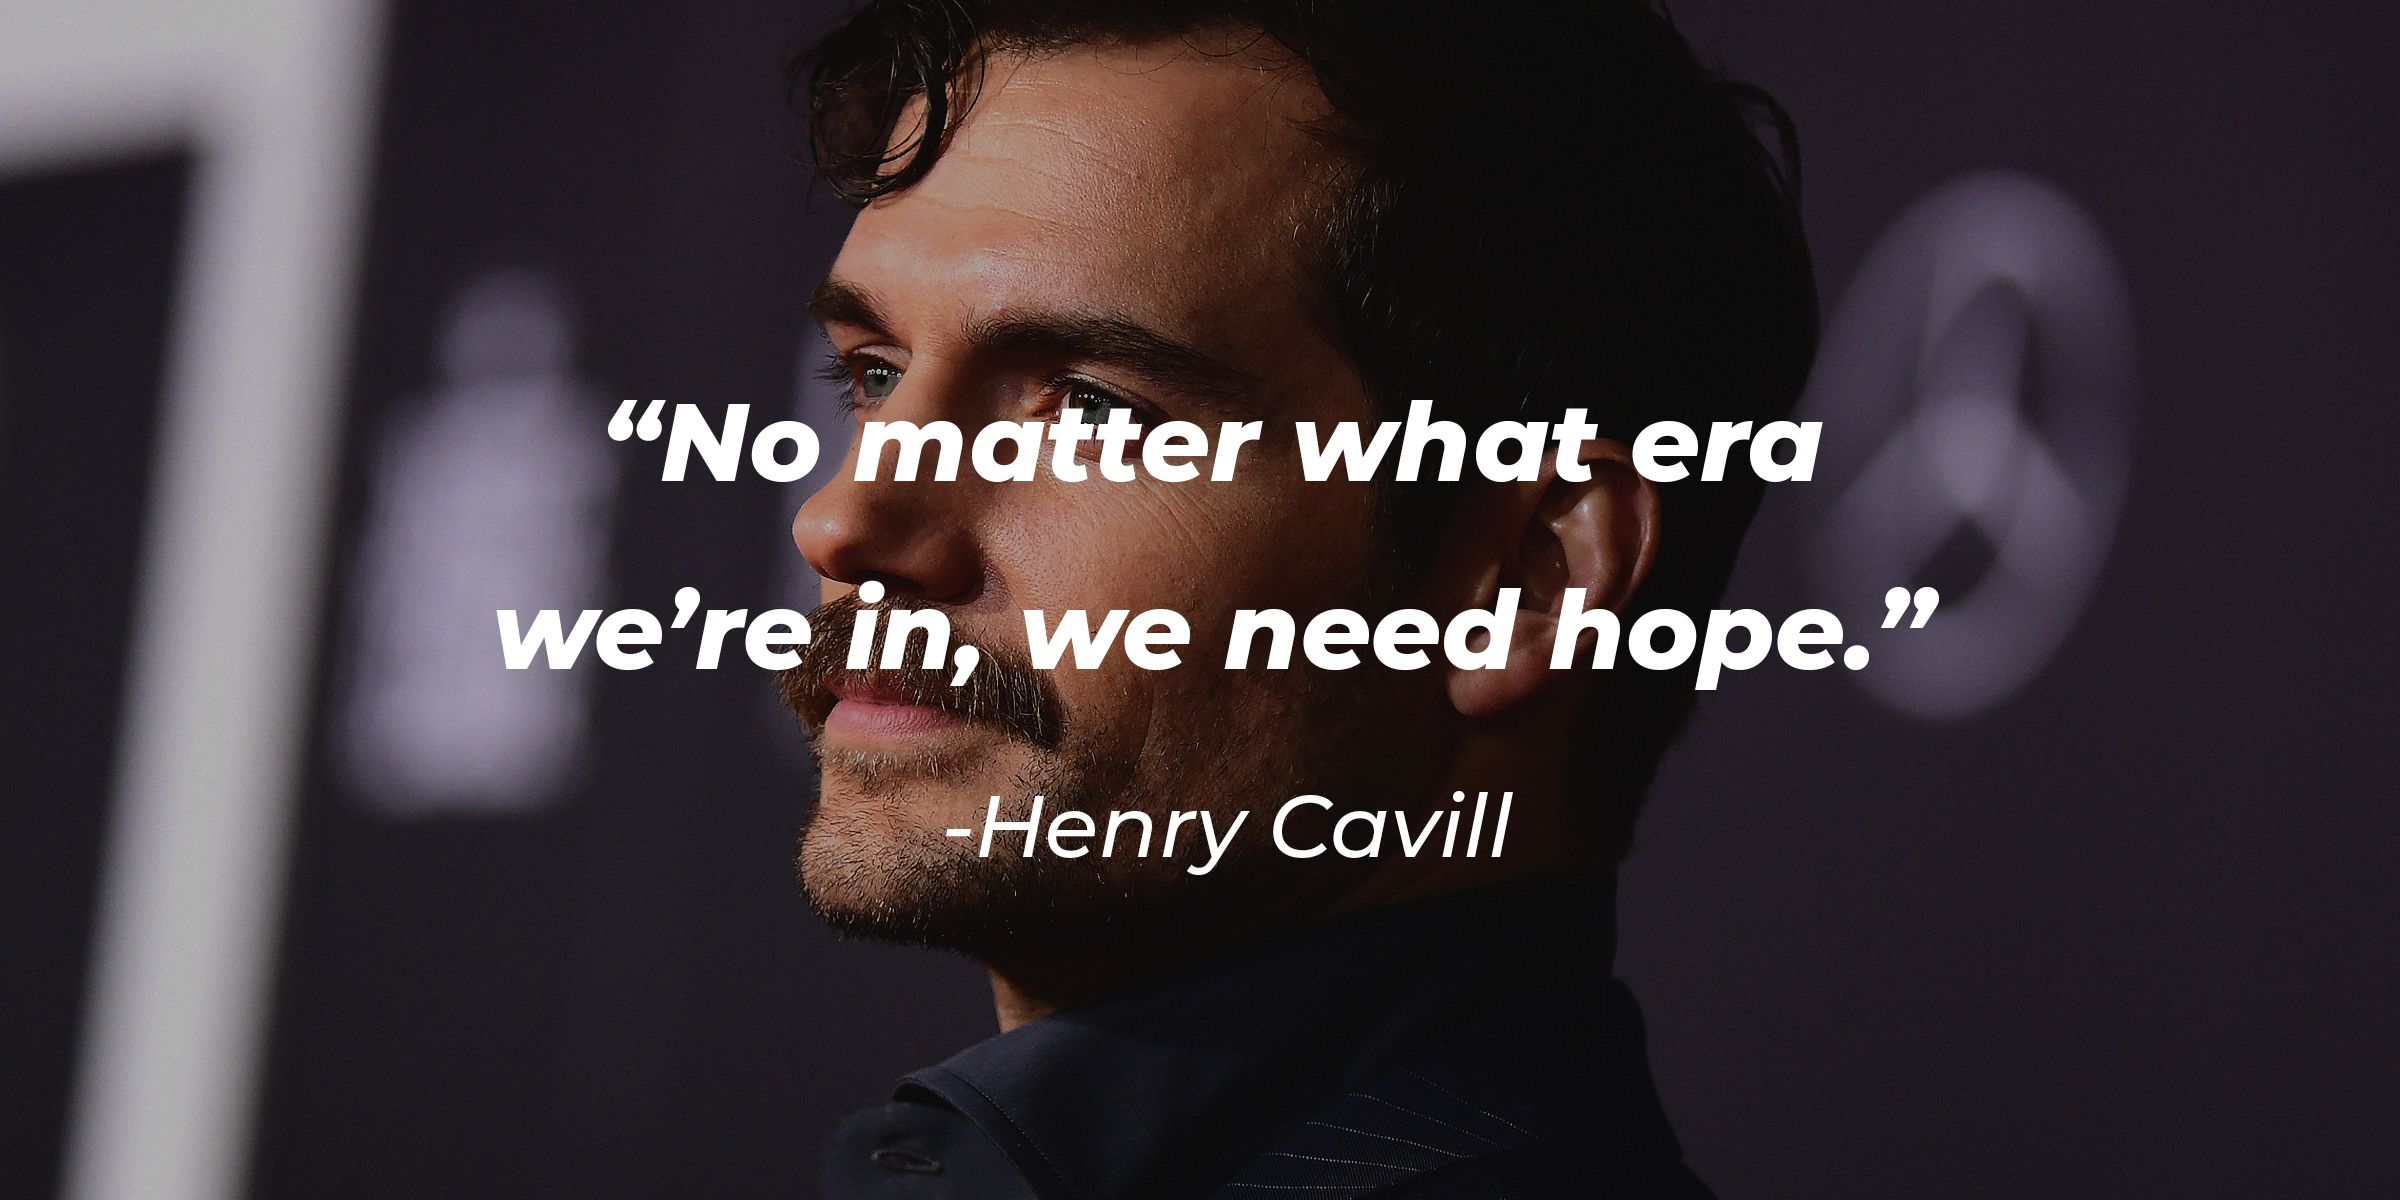 Henry Cavill, with his quote: “No matter what era we’re in, we need hope.” | Source: Getty Images